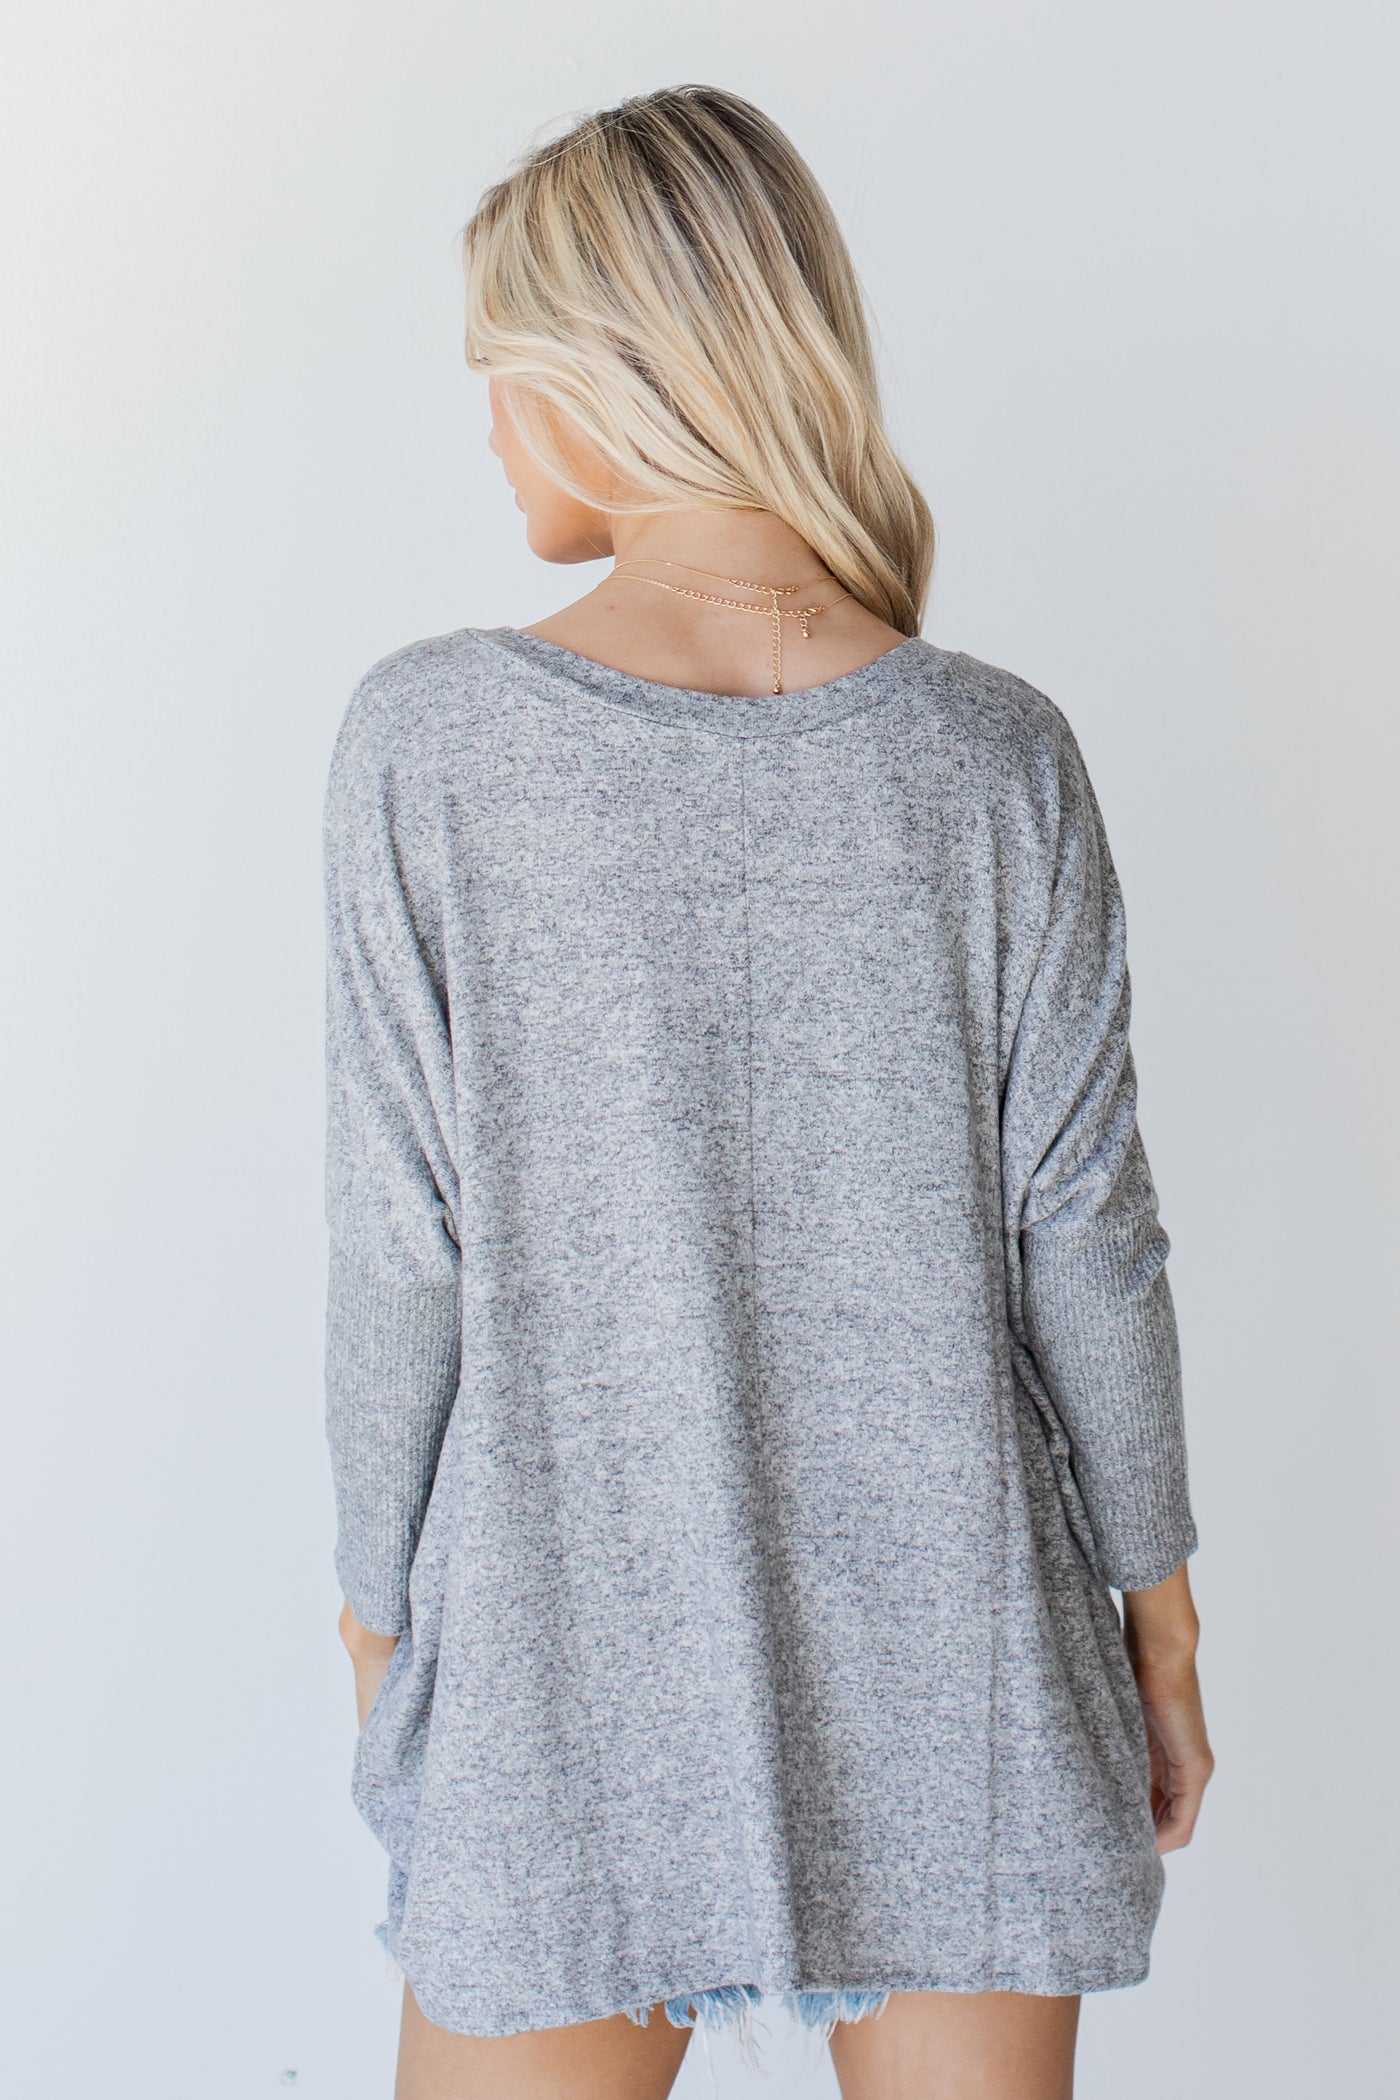 Brushed Knit Top in heather grey back view